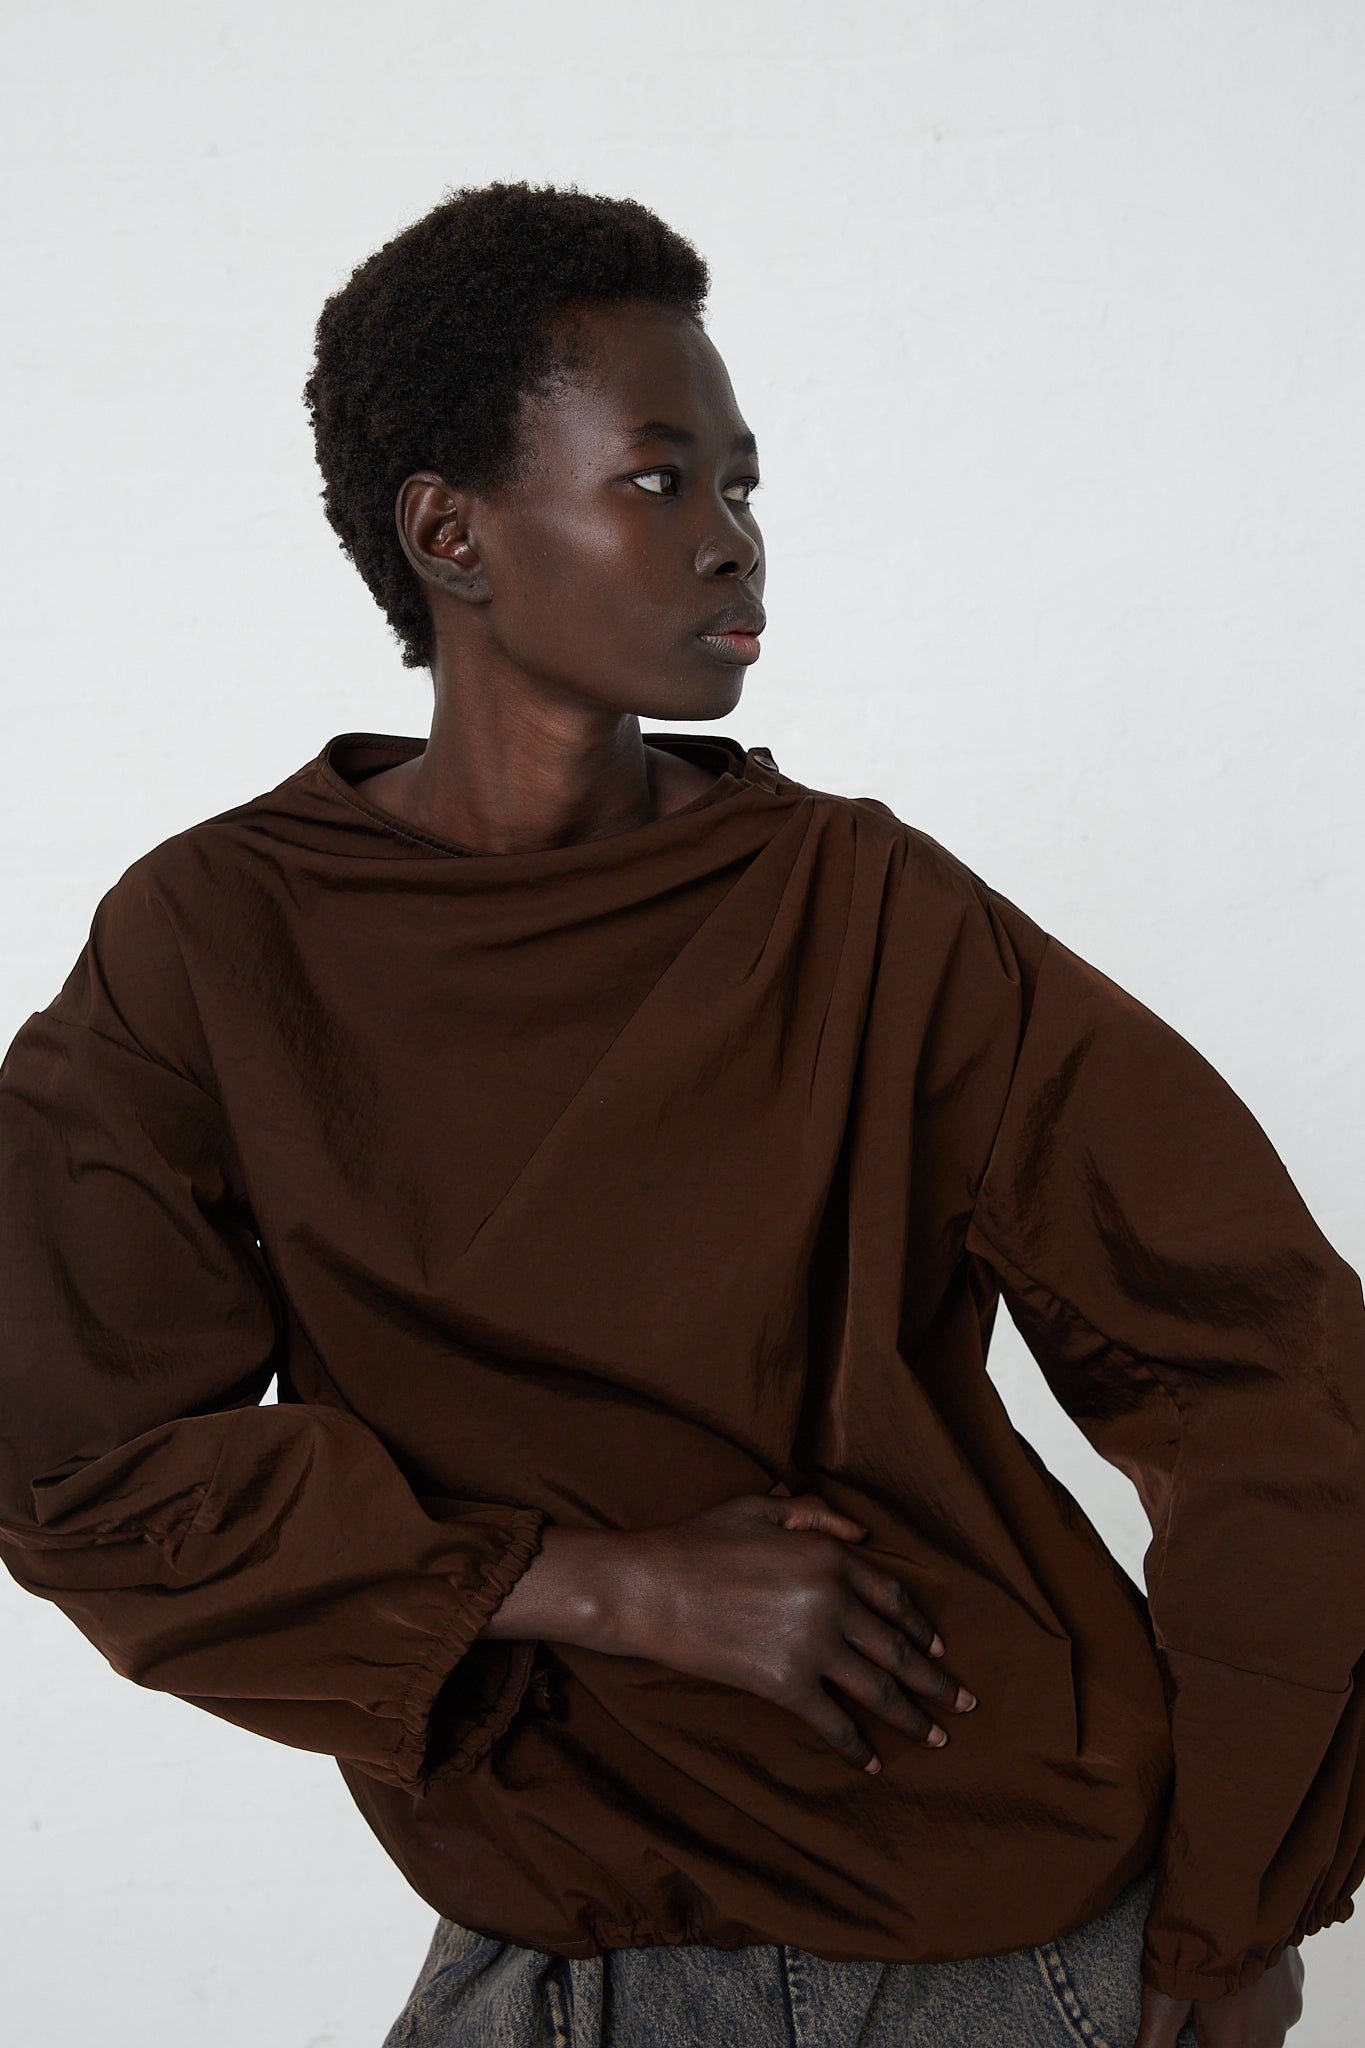 A woman is wearing the Veronique Leroy Zipped on Sleeve Rain Blouse in Choco, which has a removable hood and is made of taffeta nylon material.